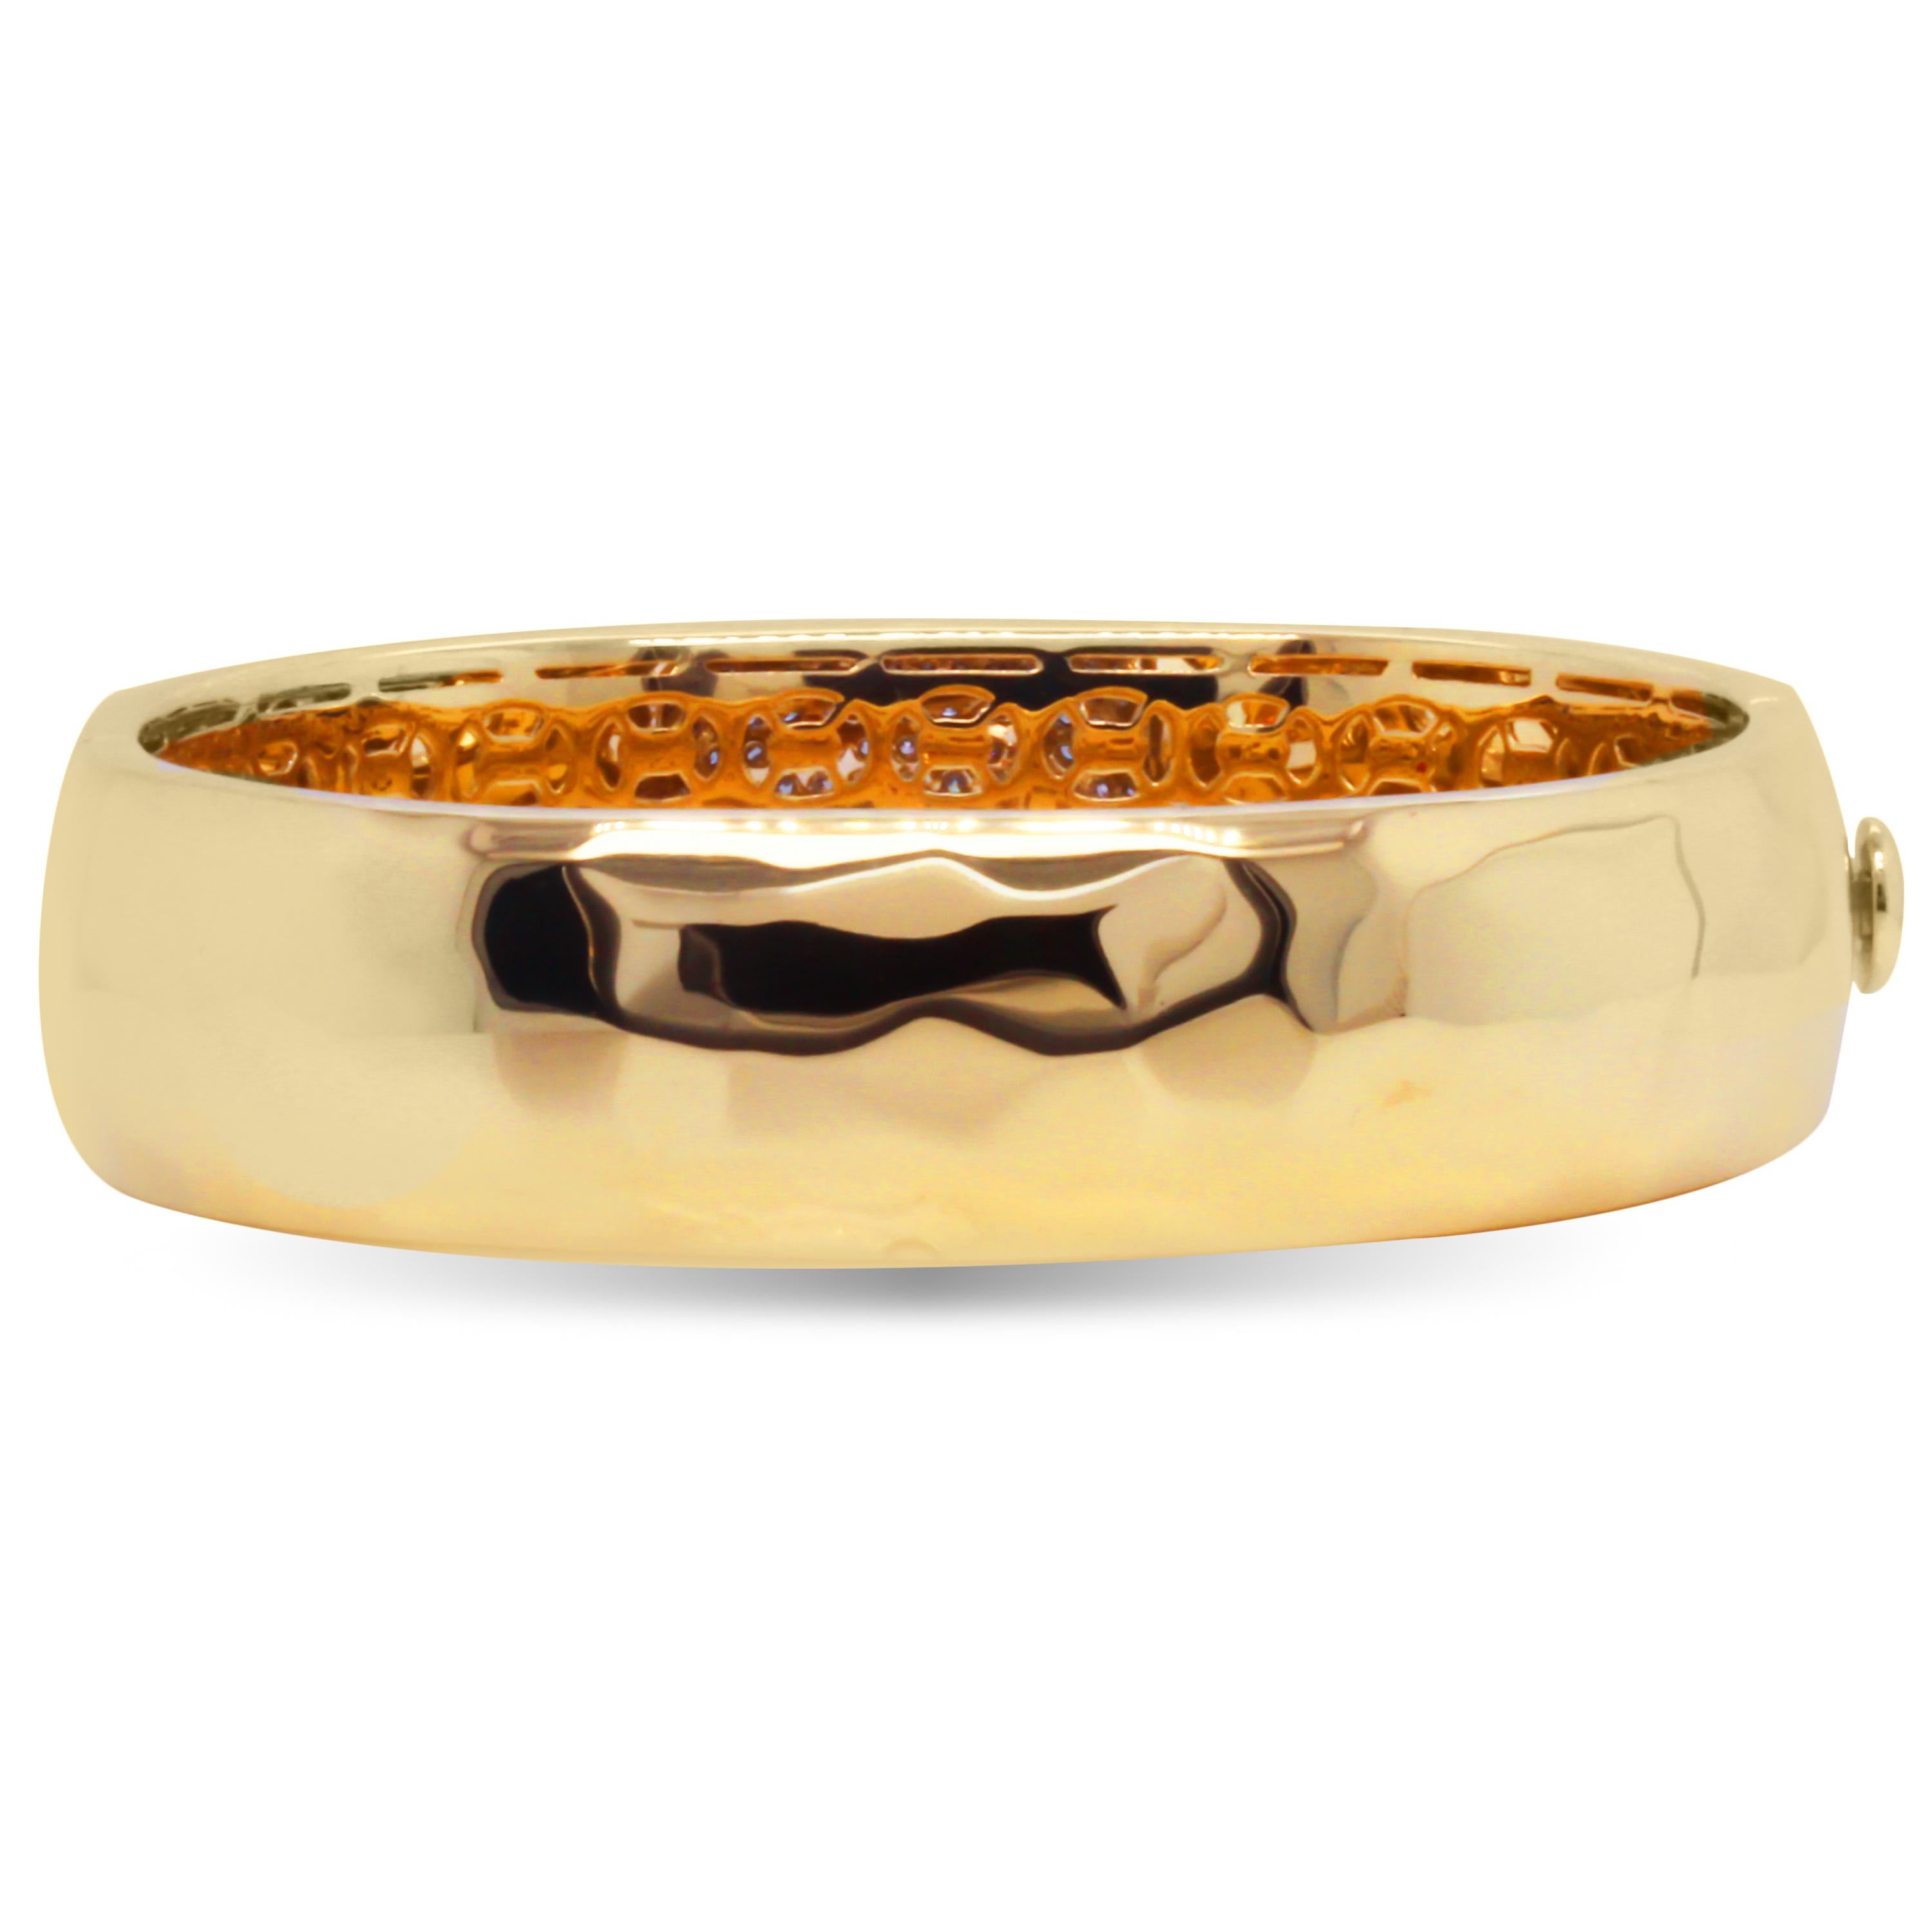 18K Yellow Gold and Diamond Bangle Bracelet. Roberto Coin Martellato

This bracelet features a hammered-like finish, high polished yellow gold with pavé set diamonds in the center

2.25 carat G color, VS clarity diamonds total weight

Bracelet is a